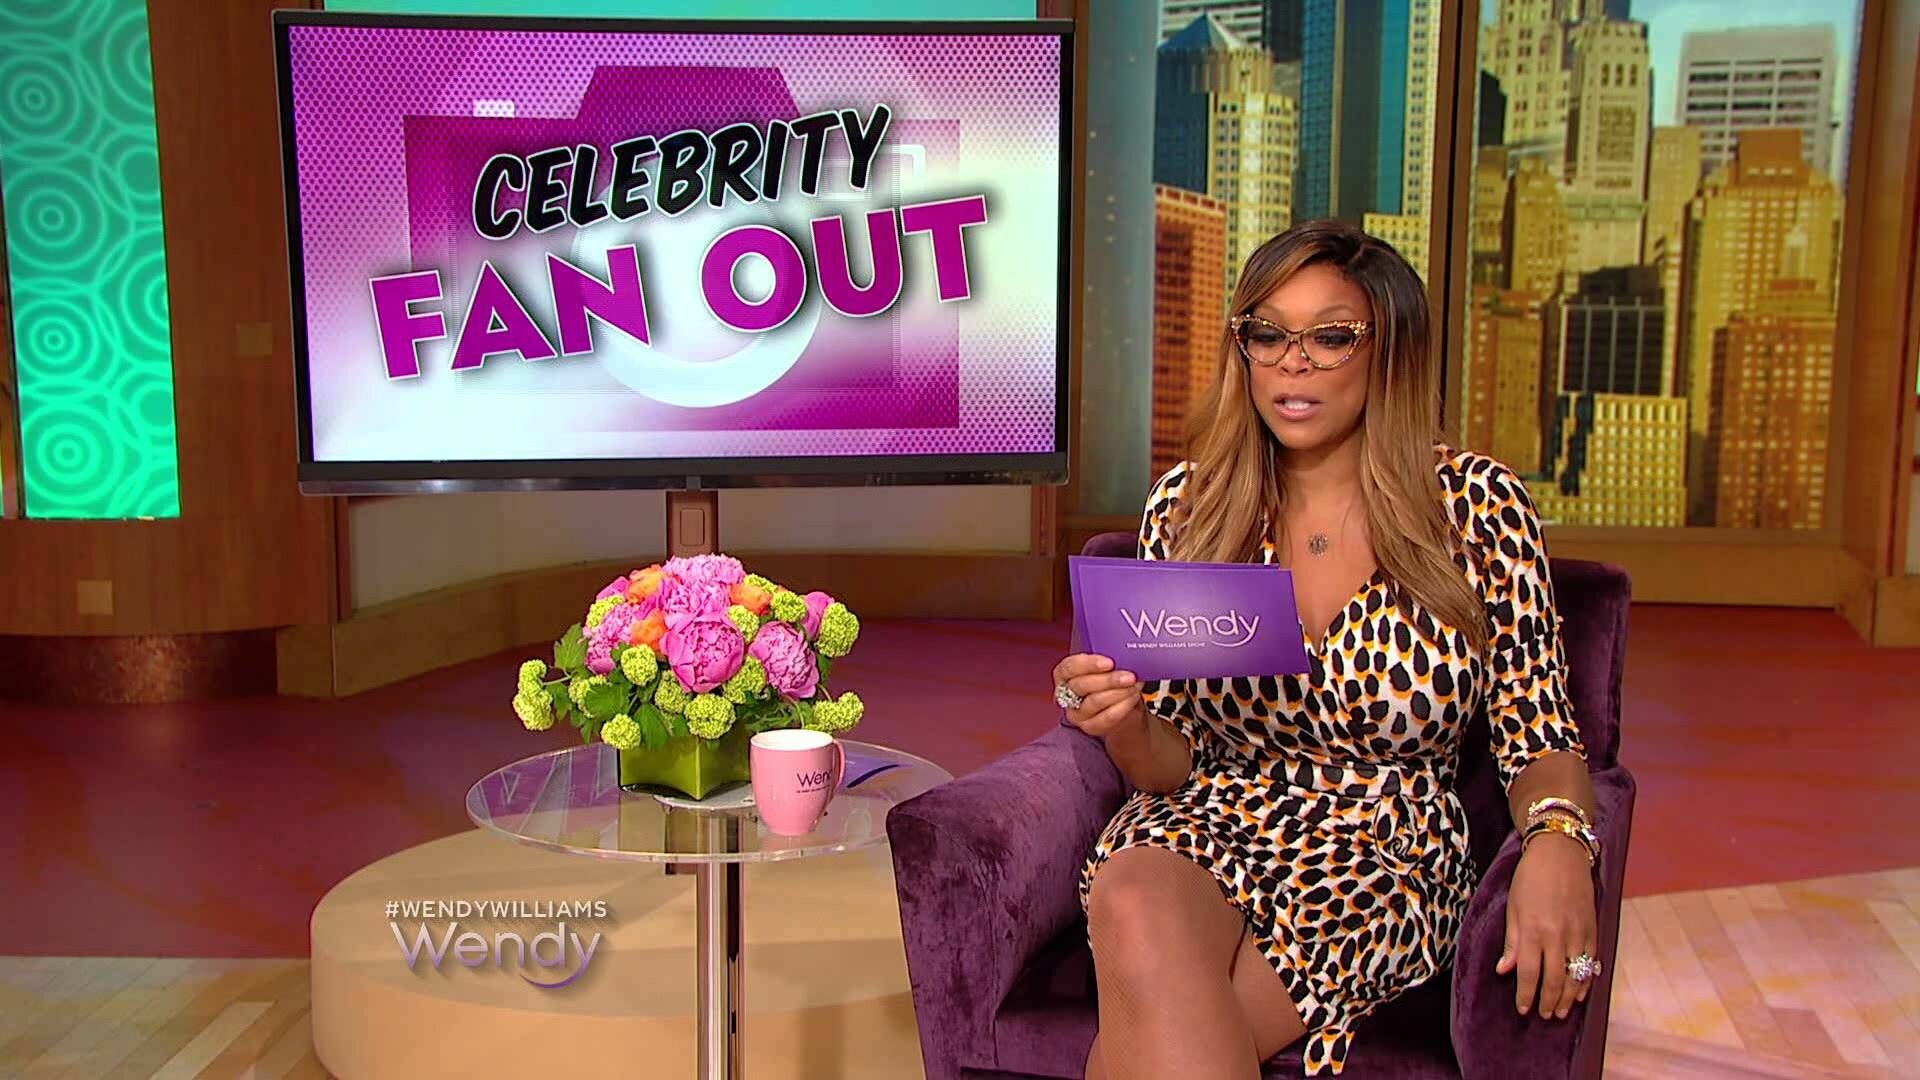 Wendy Williams: Served as a guest judge on The Face in 2013, An American broadcaster. 1920x1080 Full HD Wallpaper.